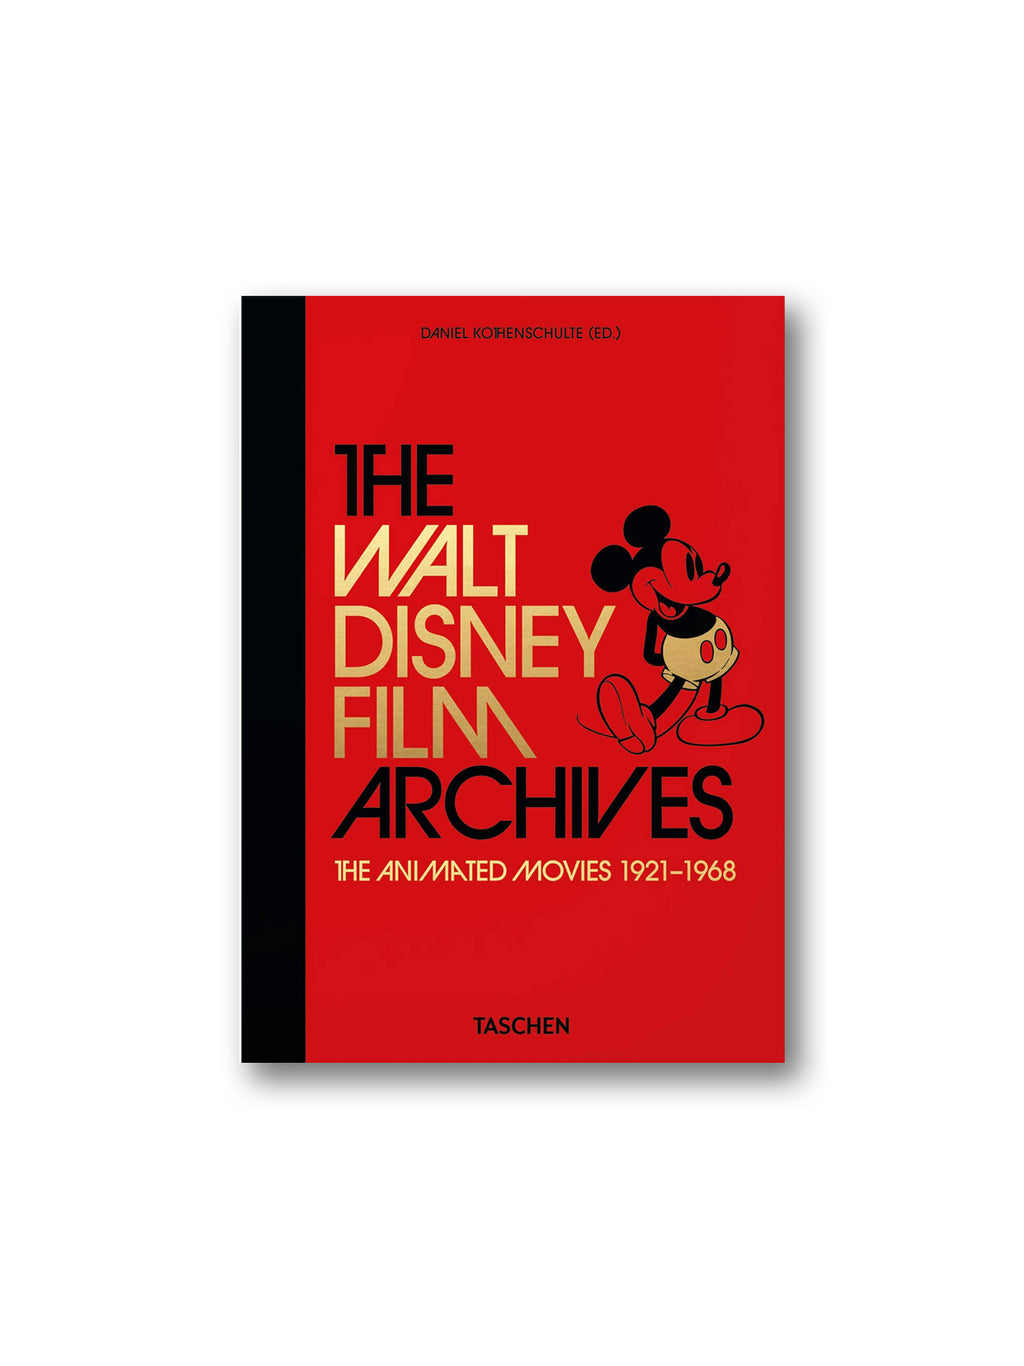 The Walt Disney Film Archives - The Animated Movies 1921-1968 - 40th Anniversary Edition